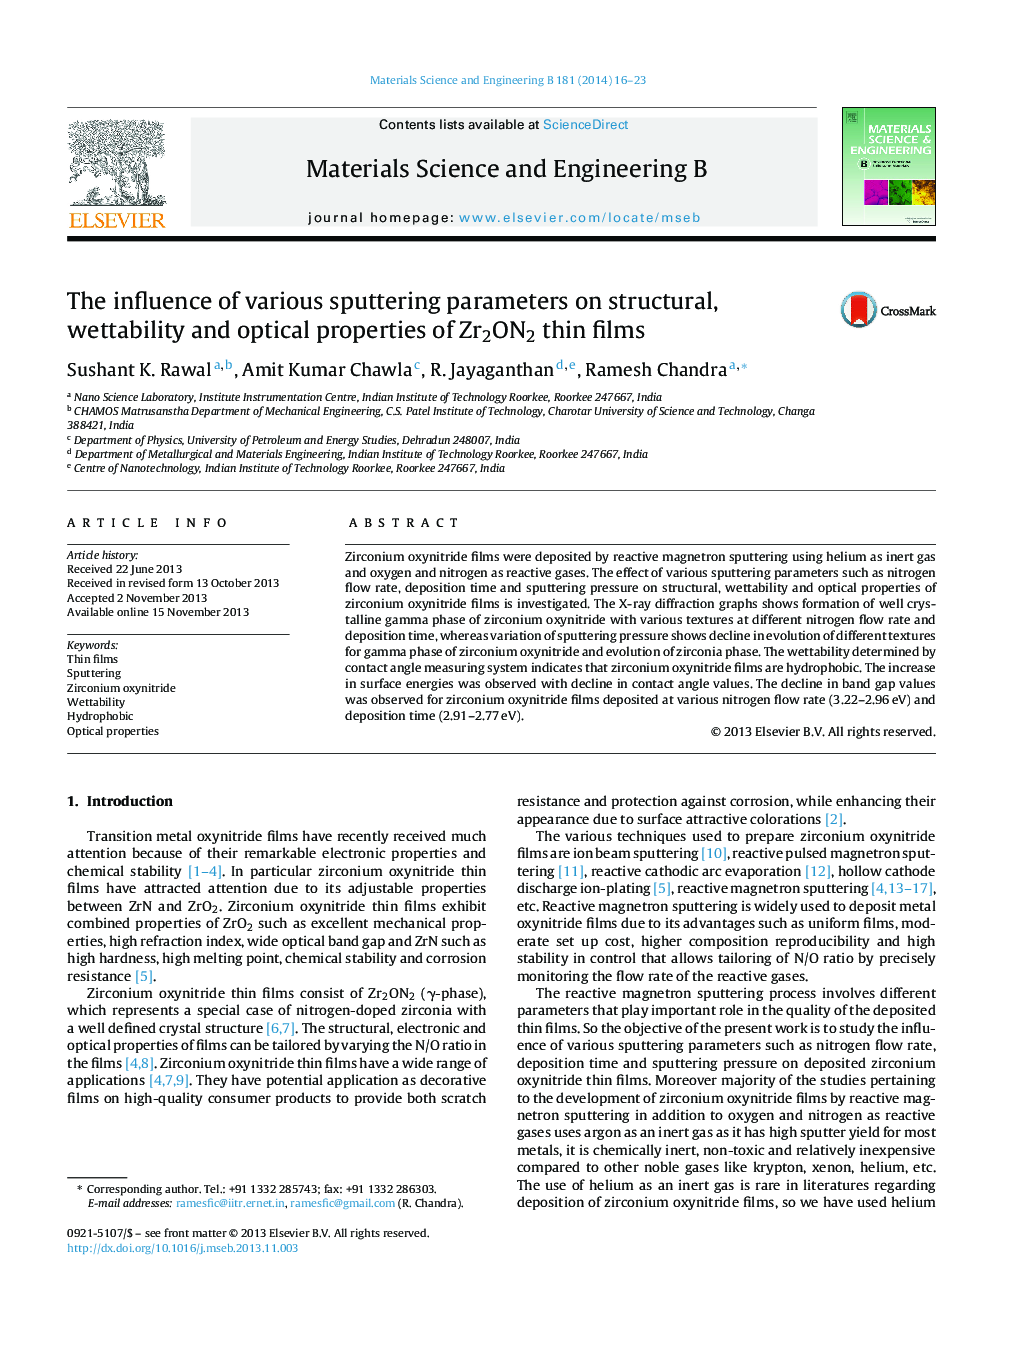 The influence of various sputtering parameters on structural, wettability and optical properties of Zr2ON2 thin films